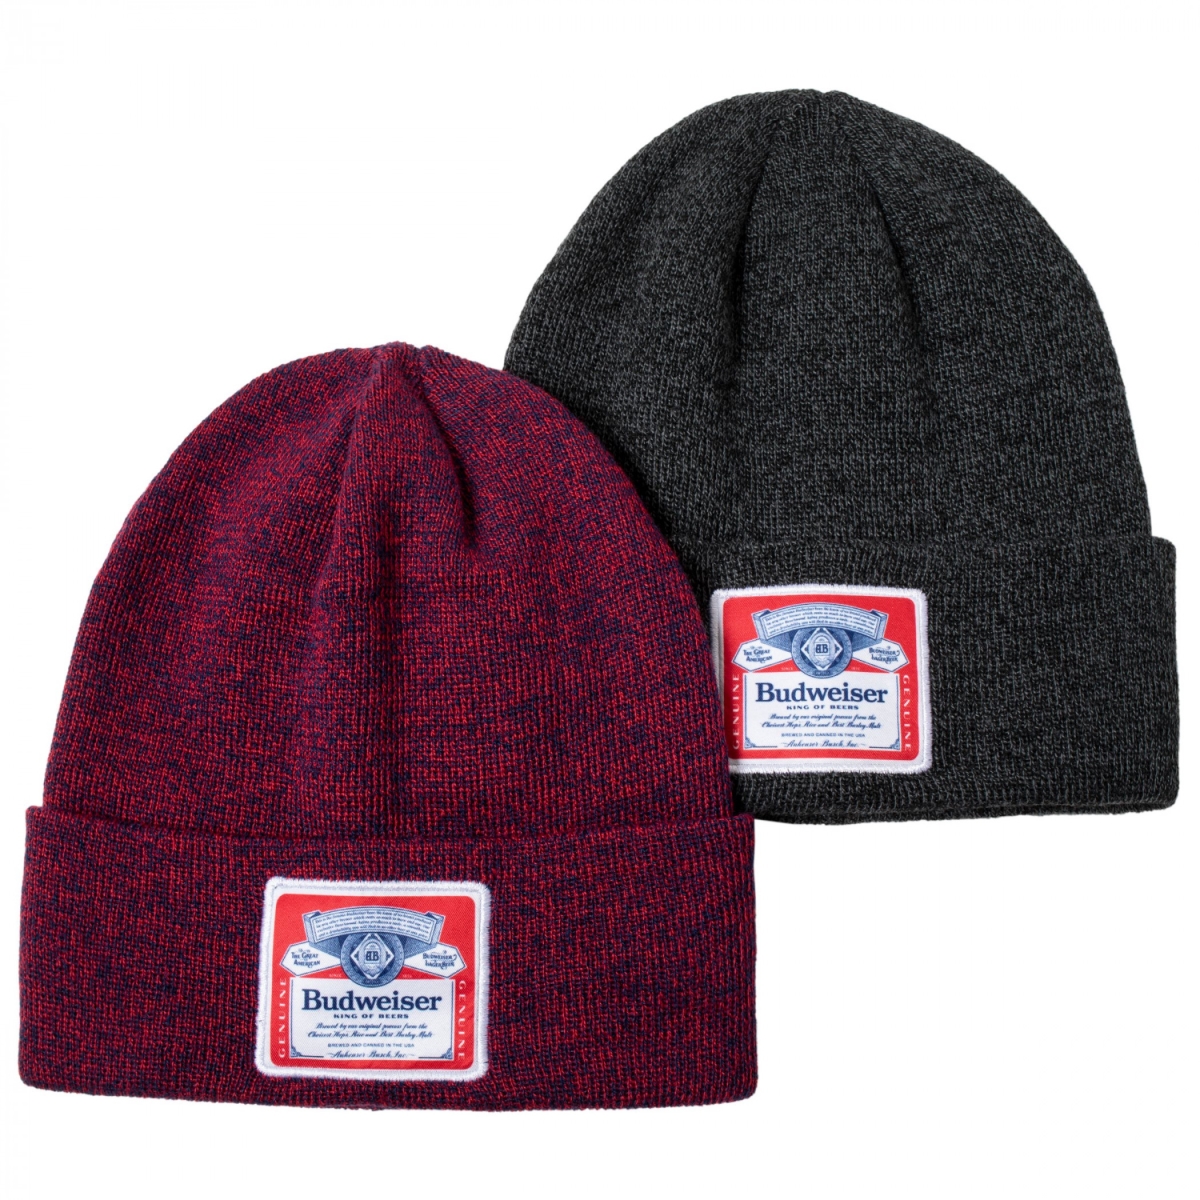 Picture of Budweiser 830451 Budweiser Label Patch Knit Cuff Beanie - Pack of 2